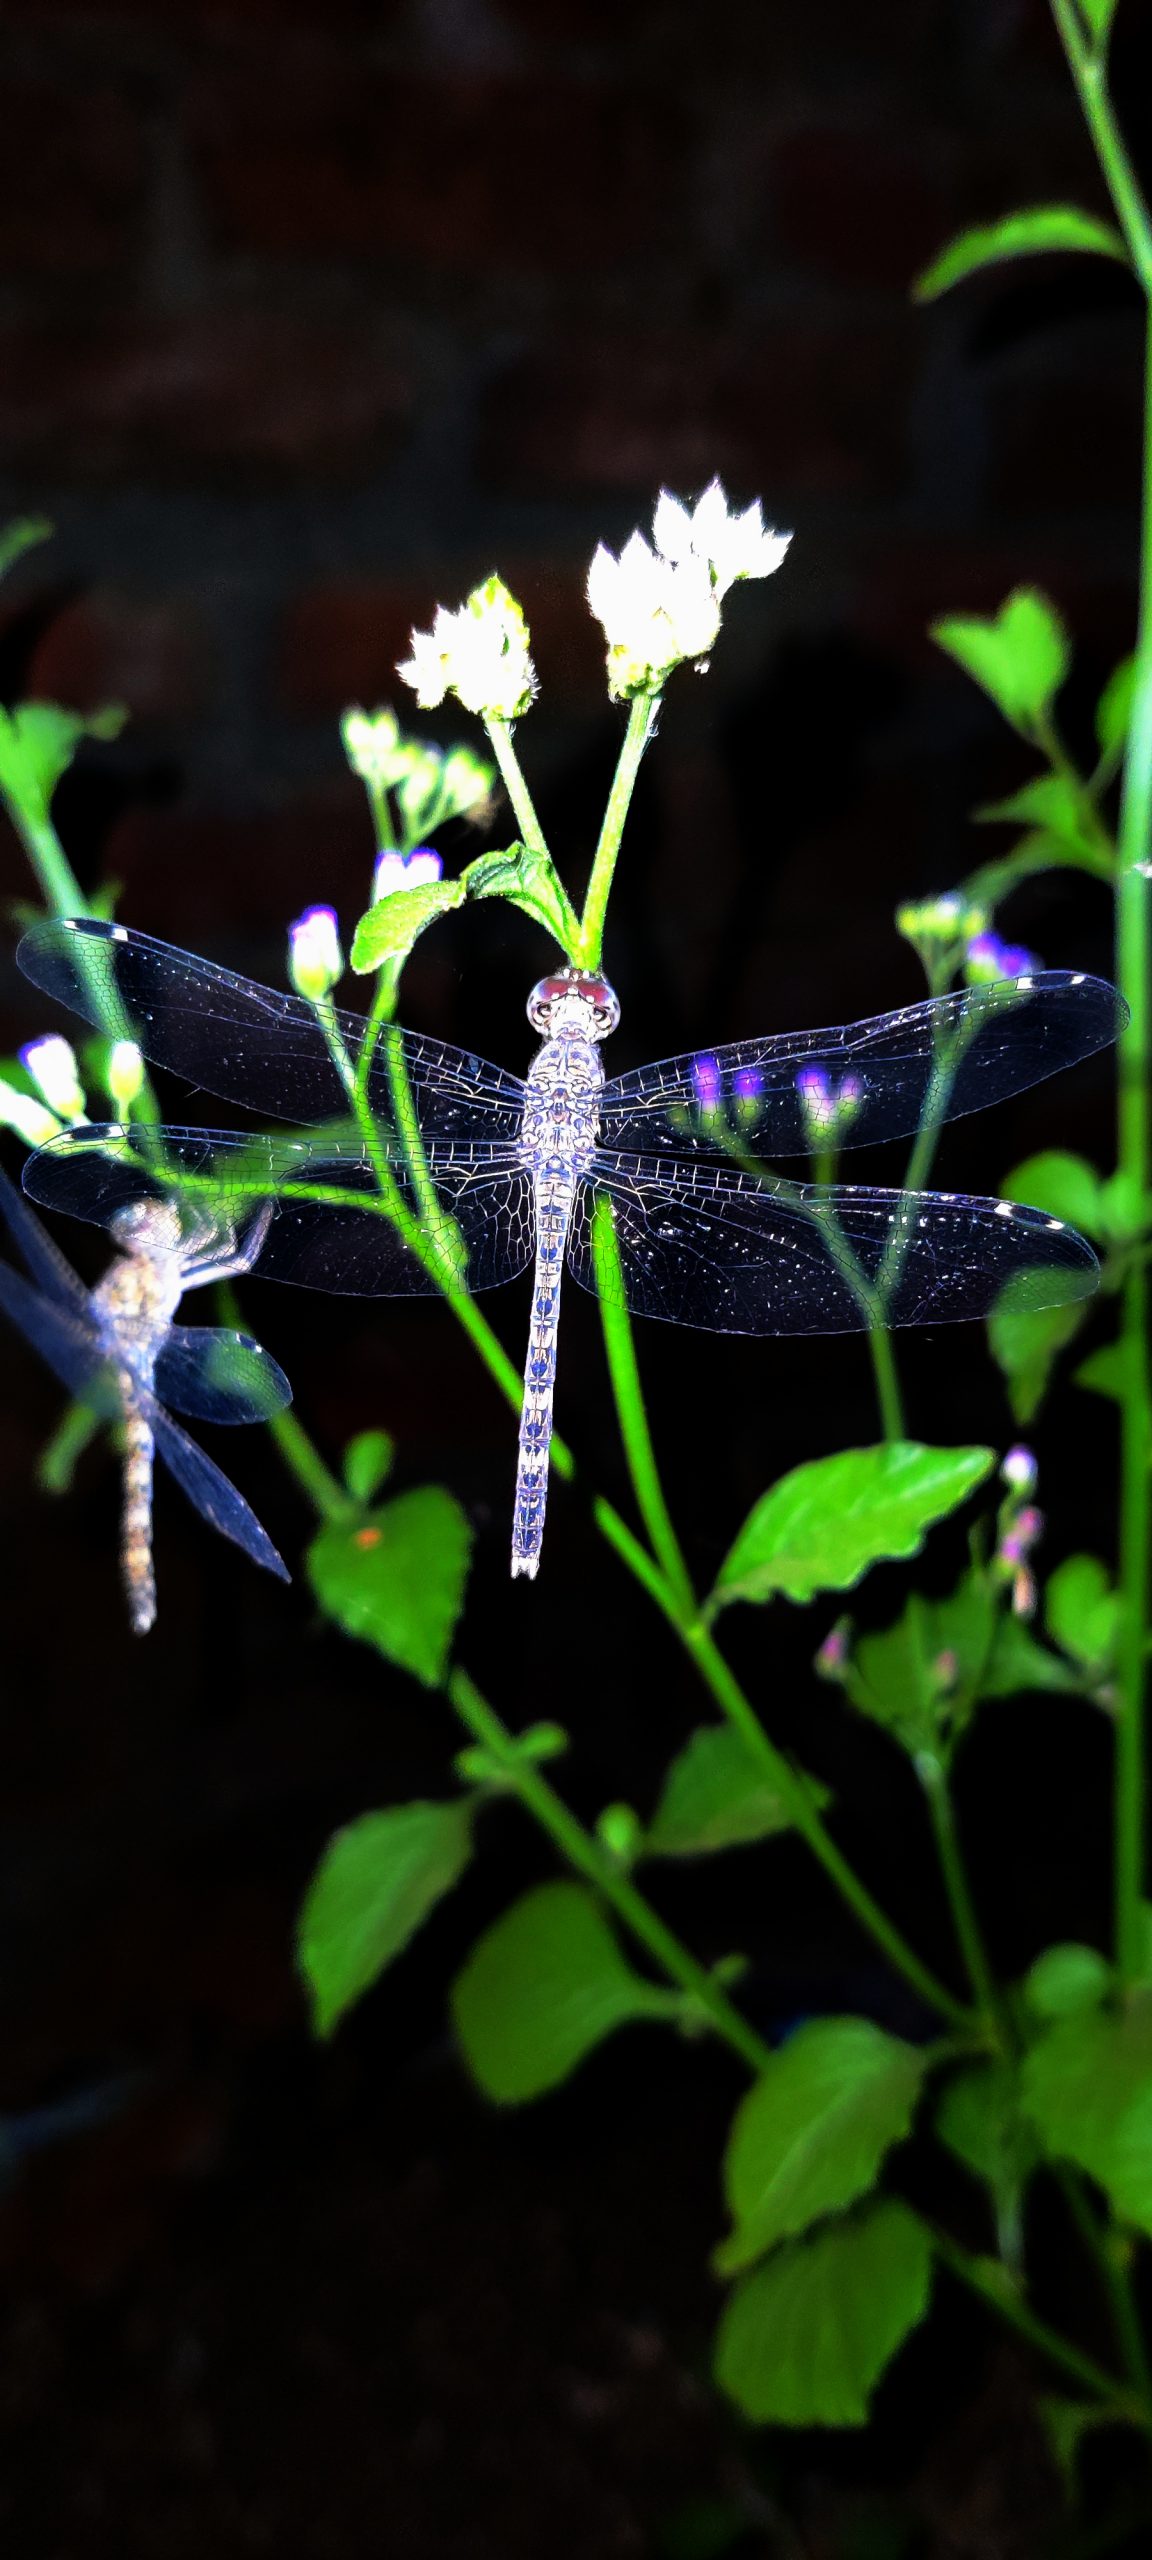 Chalky percher dragon fly on a plant